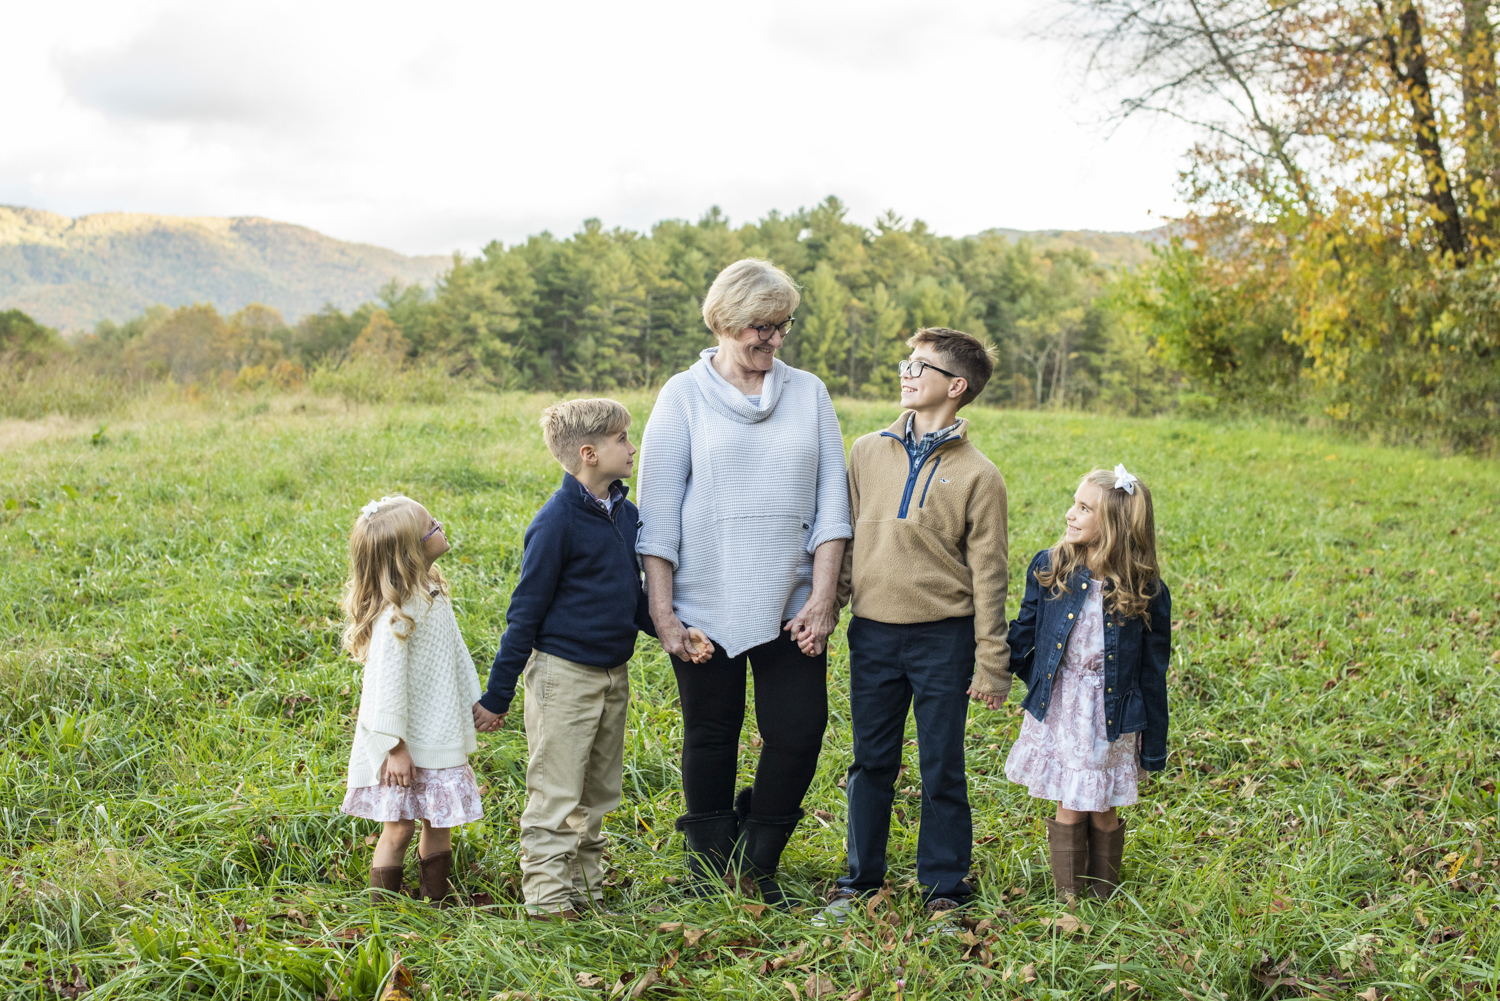 Grandma and grandkids in a field with mountain views